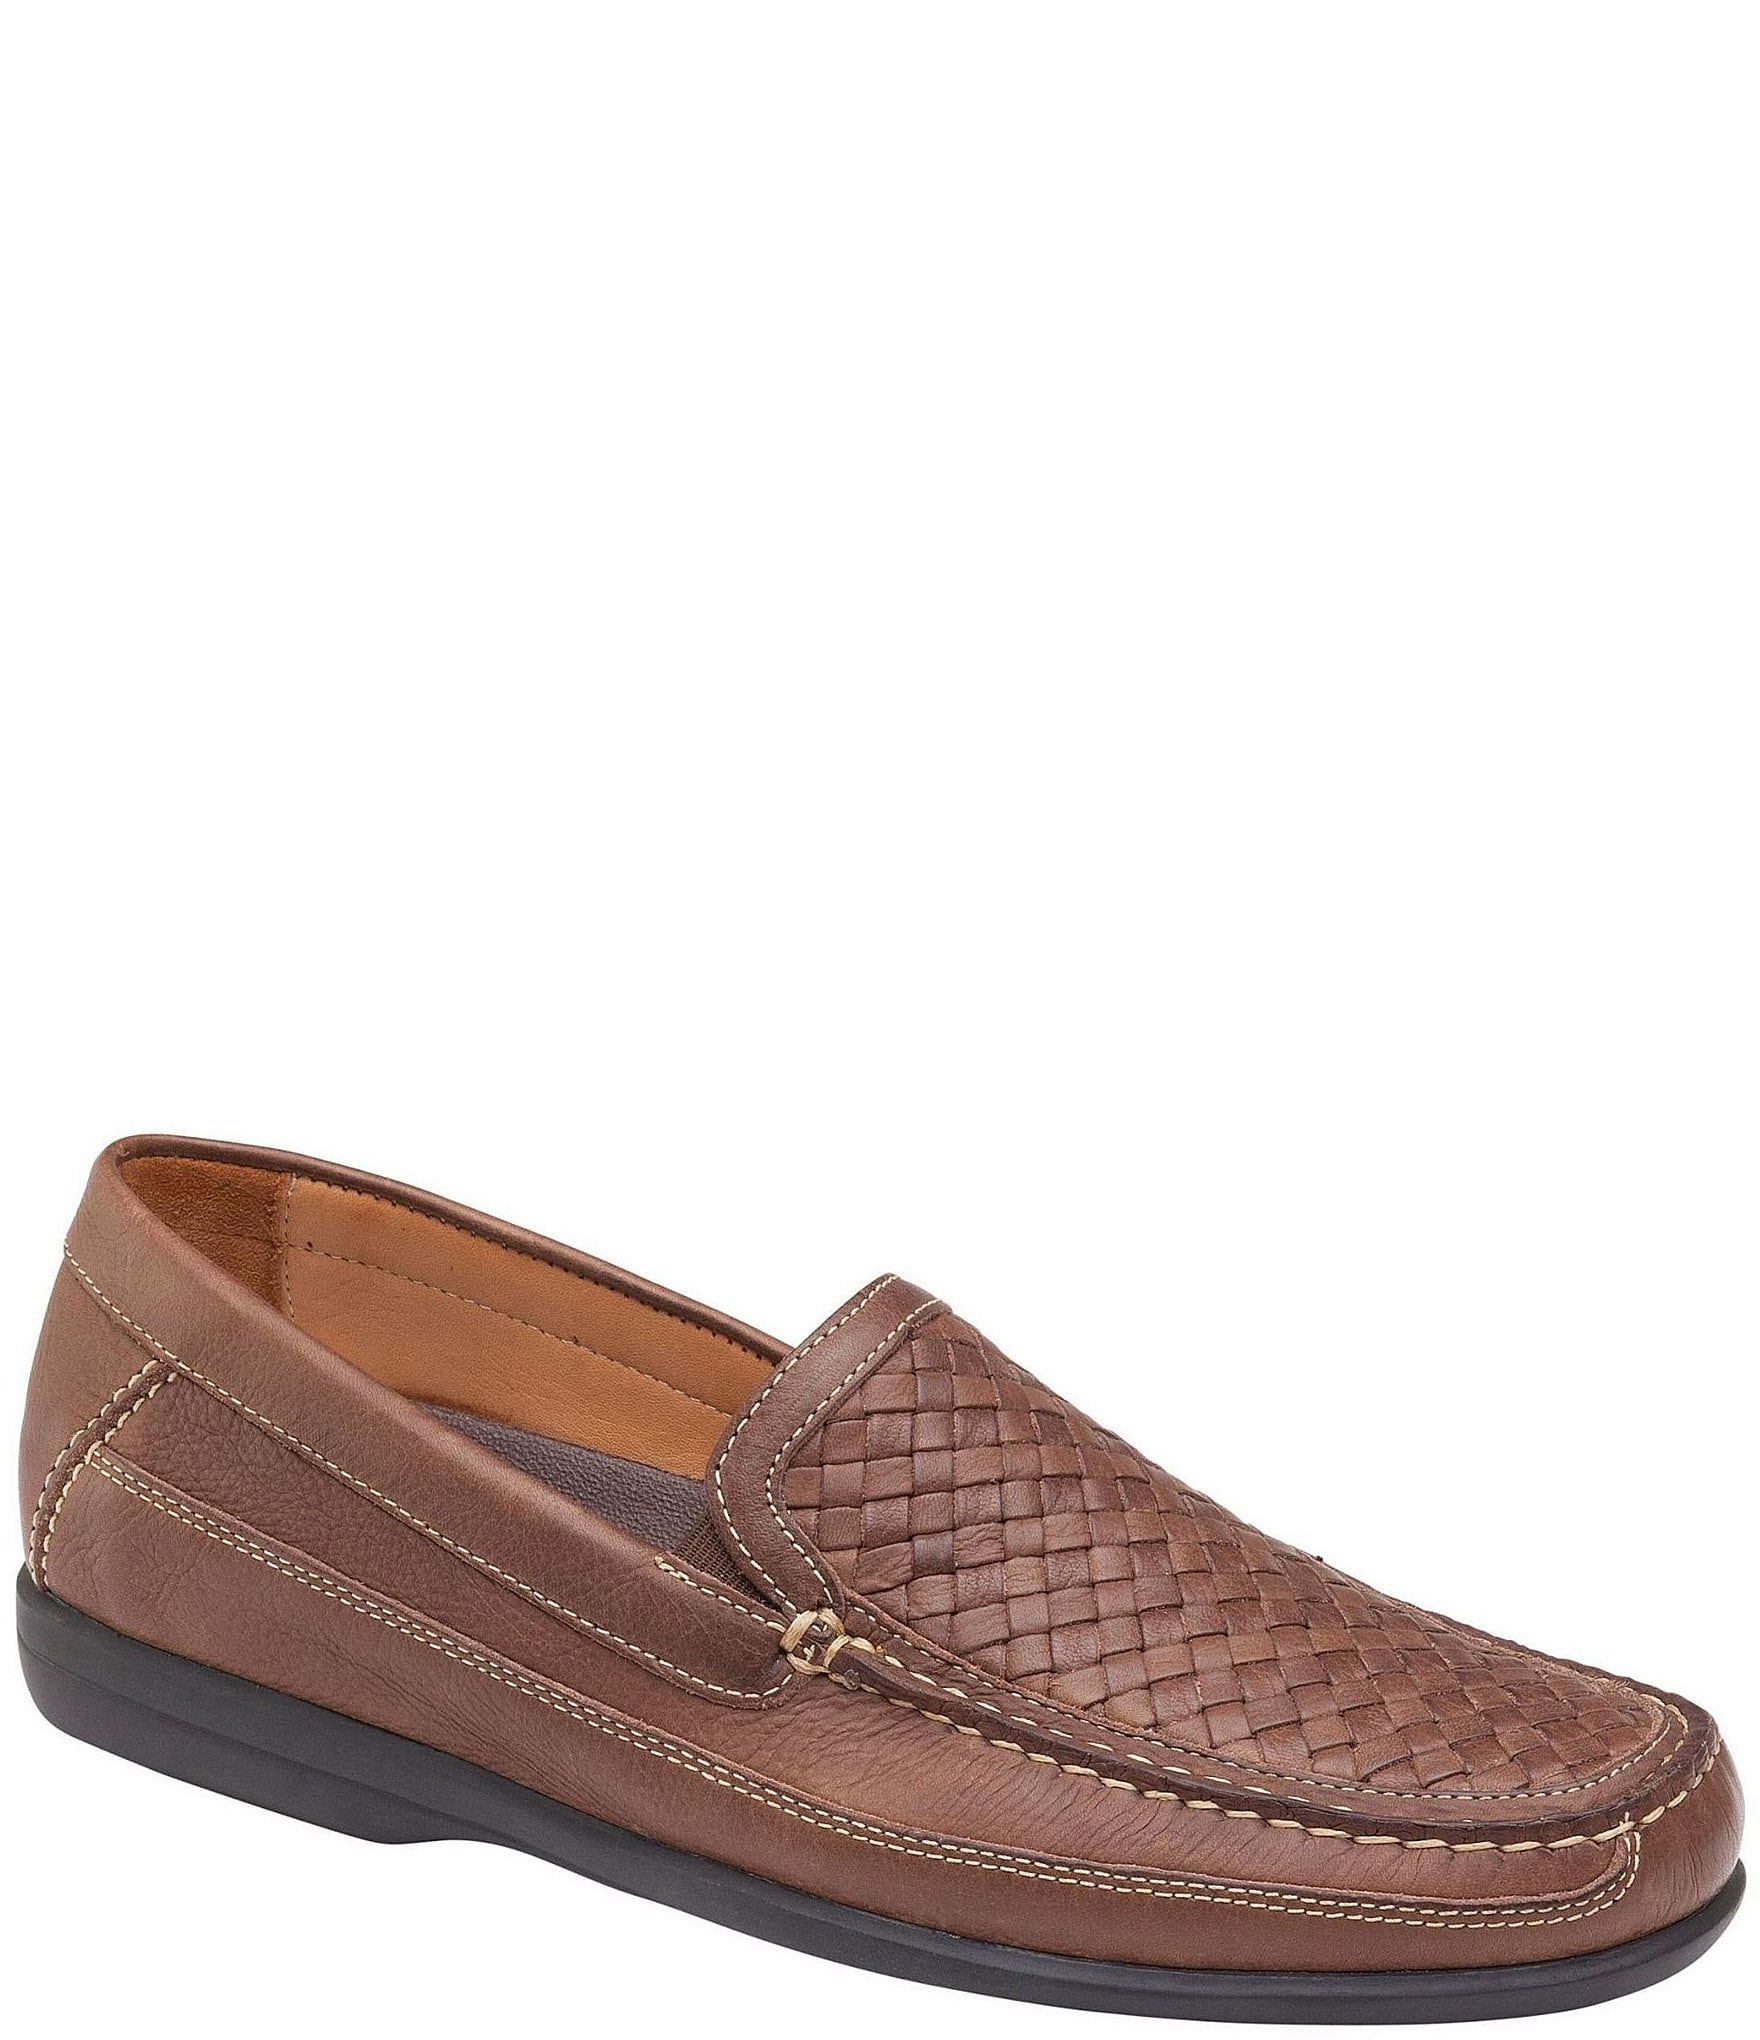 woven moccasins mens